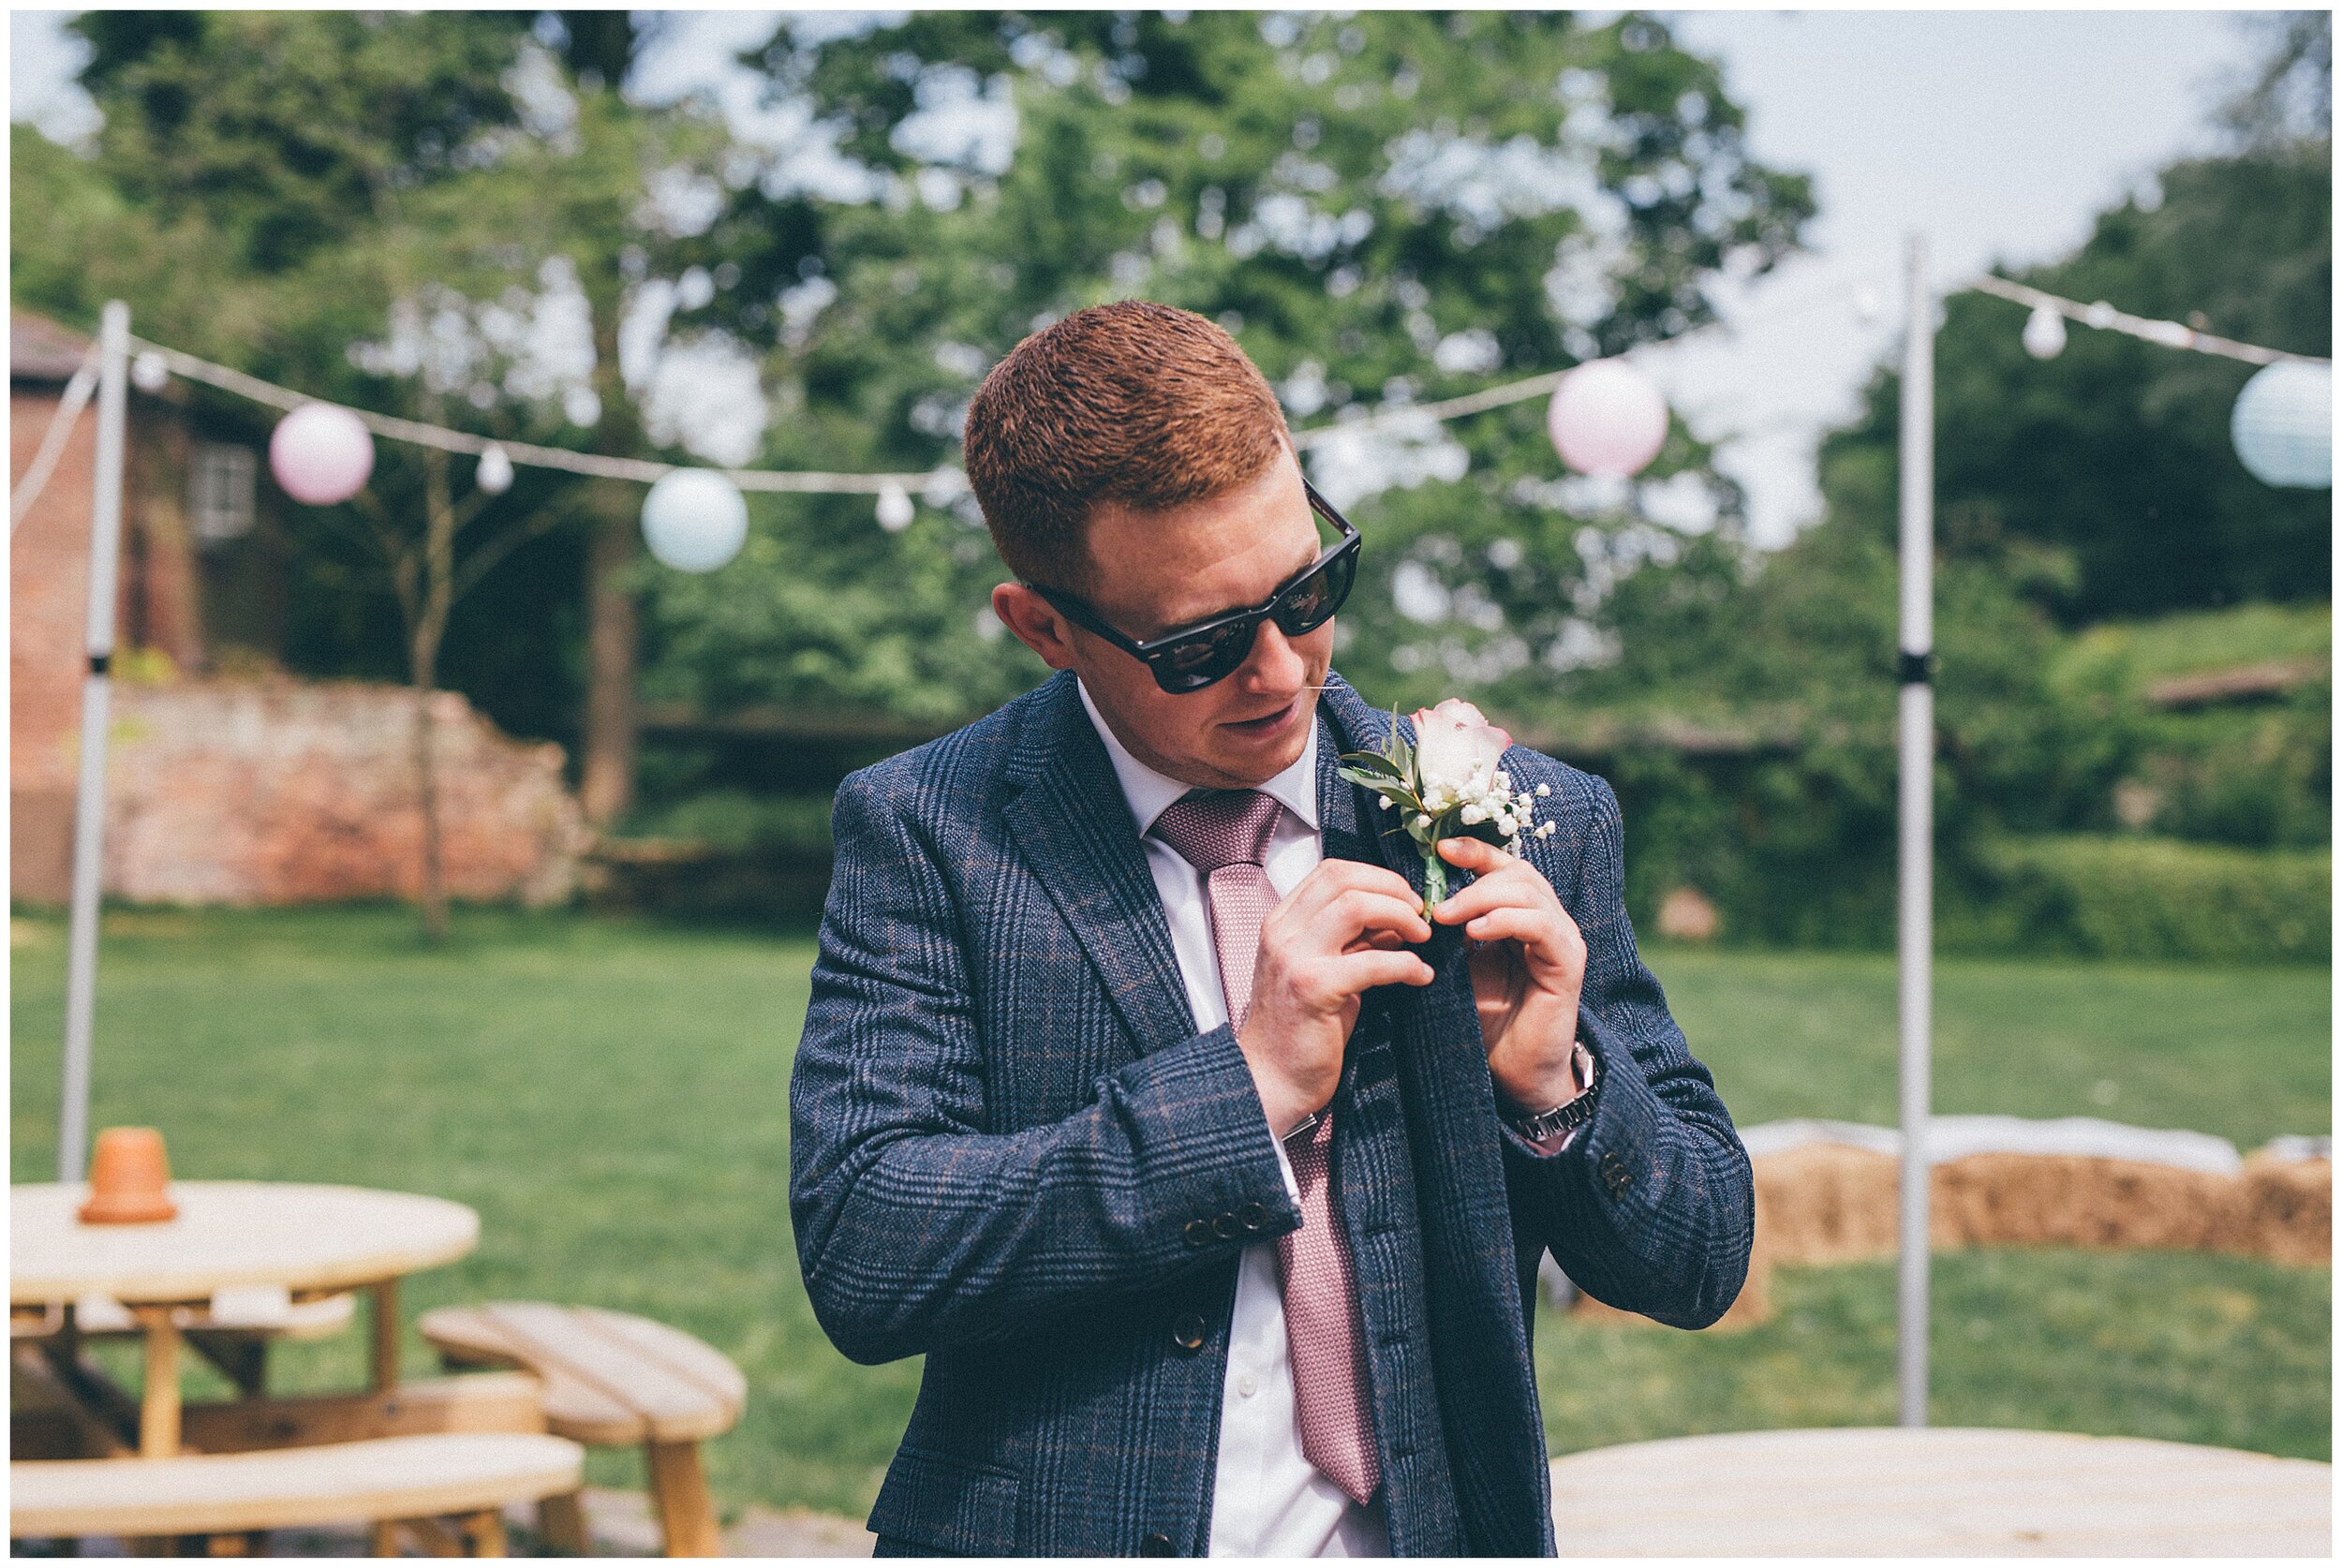 Groom puts on his buttonhole before his rustic wedding in Cheshire.